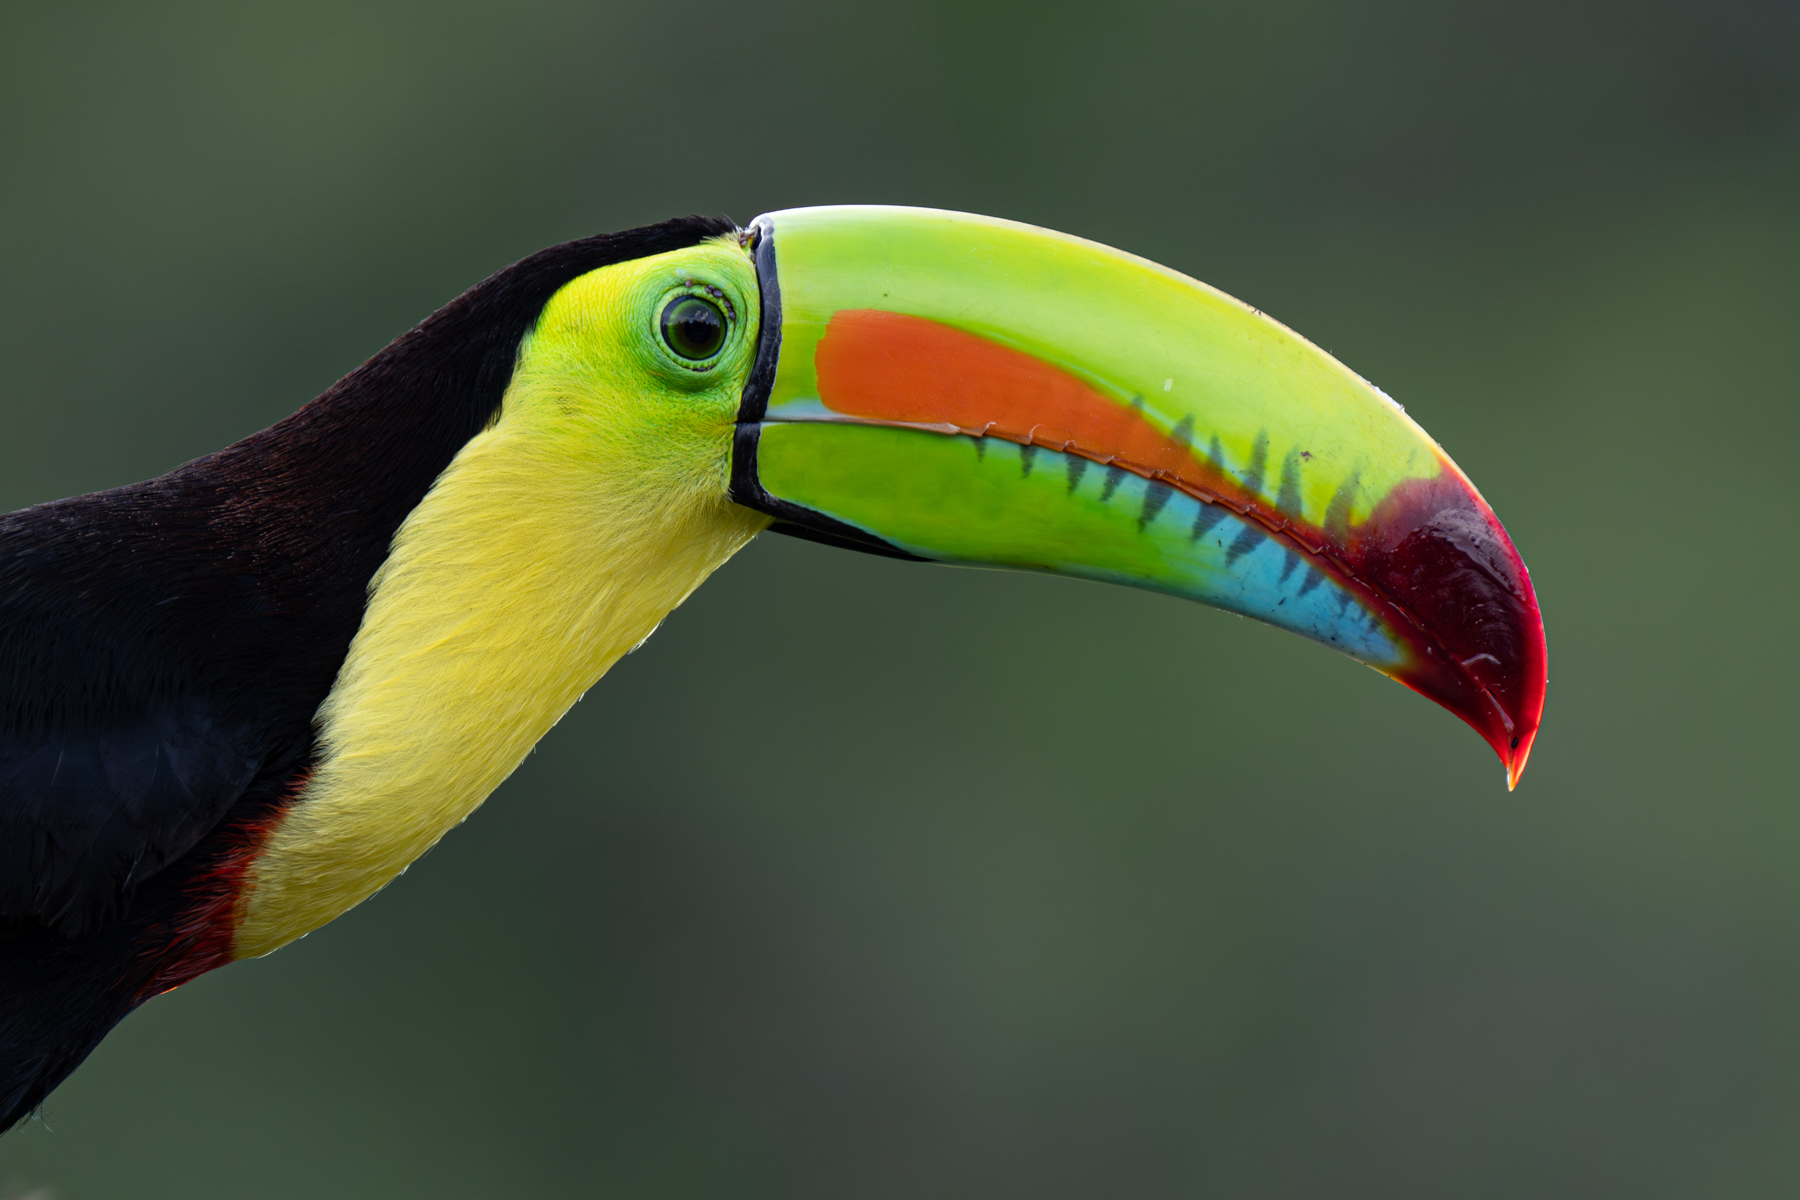 Can you ever have too many photos of Keel-billed Toucans? (image by Inger Vandyke)